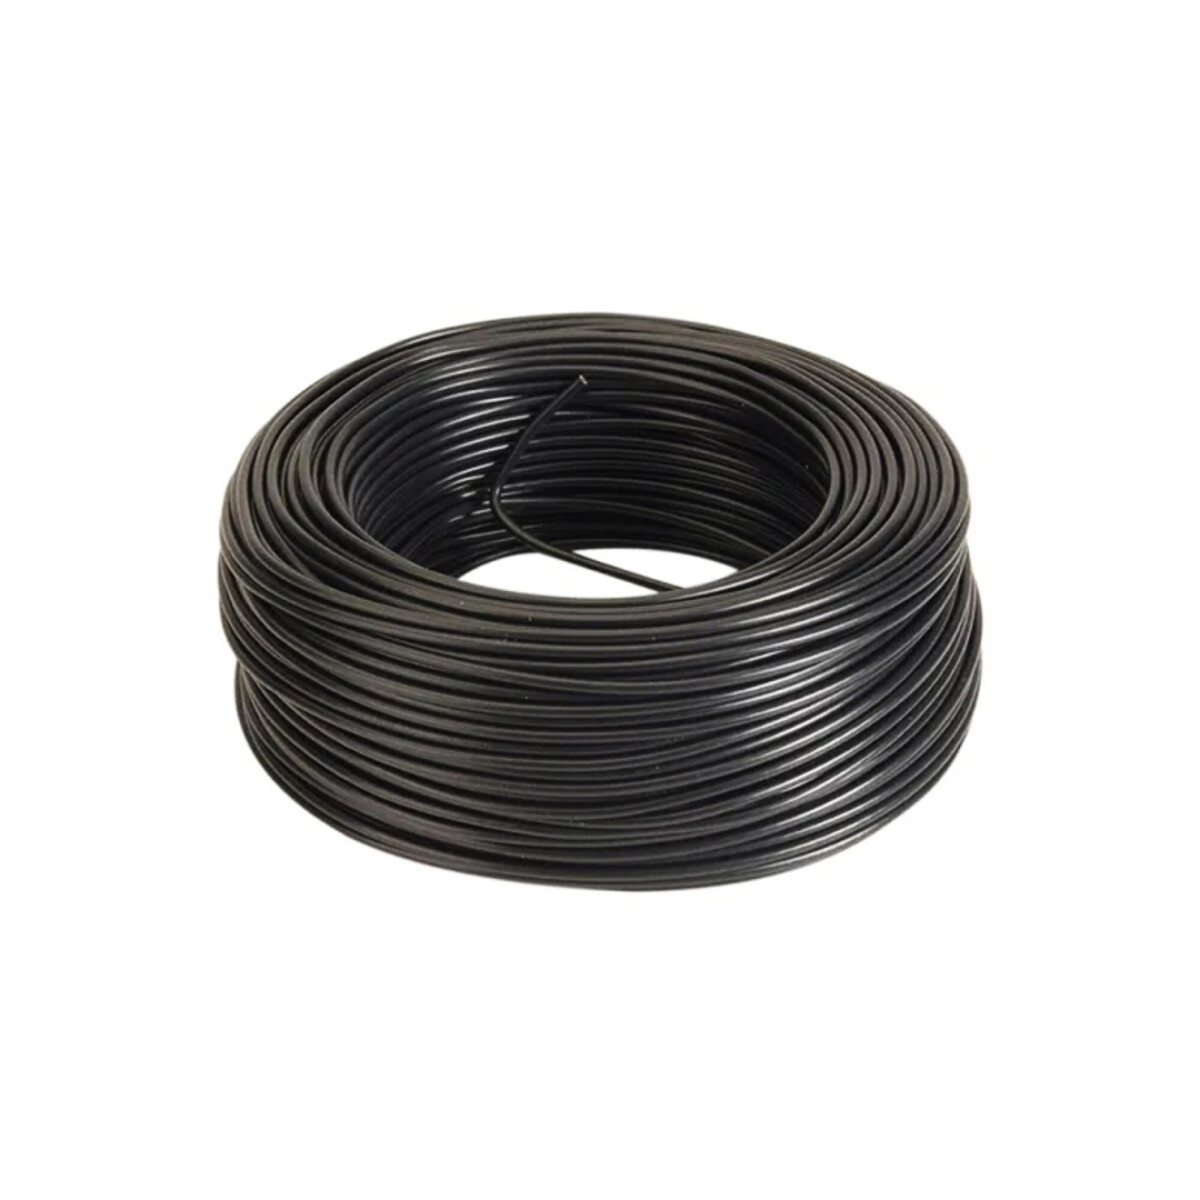 Cable EPROFLEX 90 4X1.50mm x 100 mts 